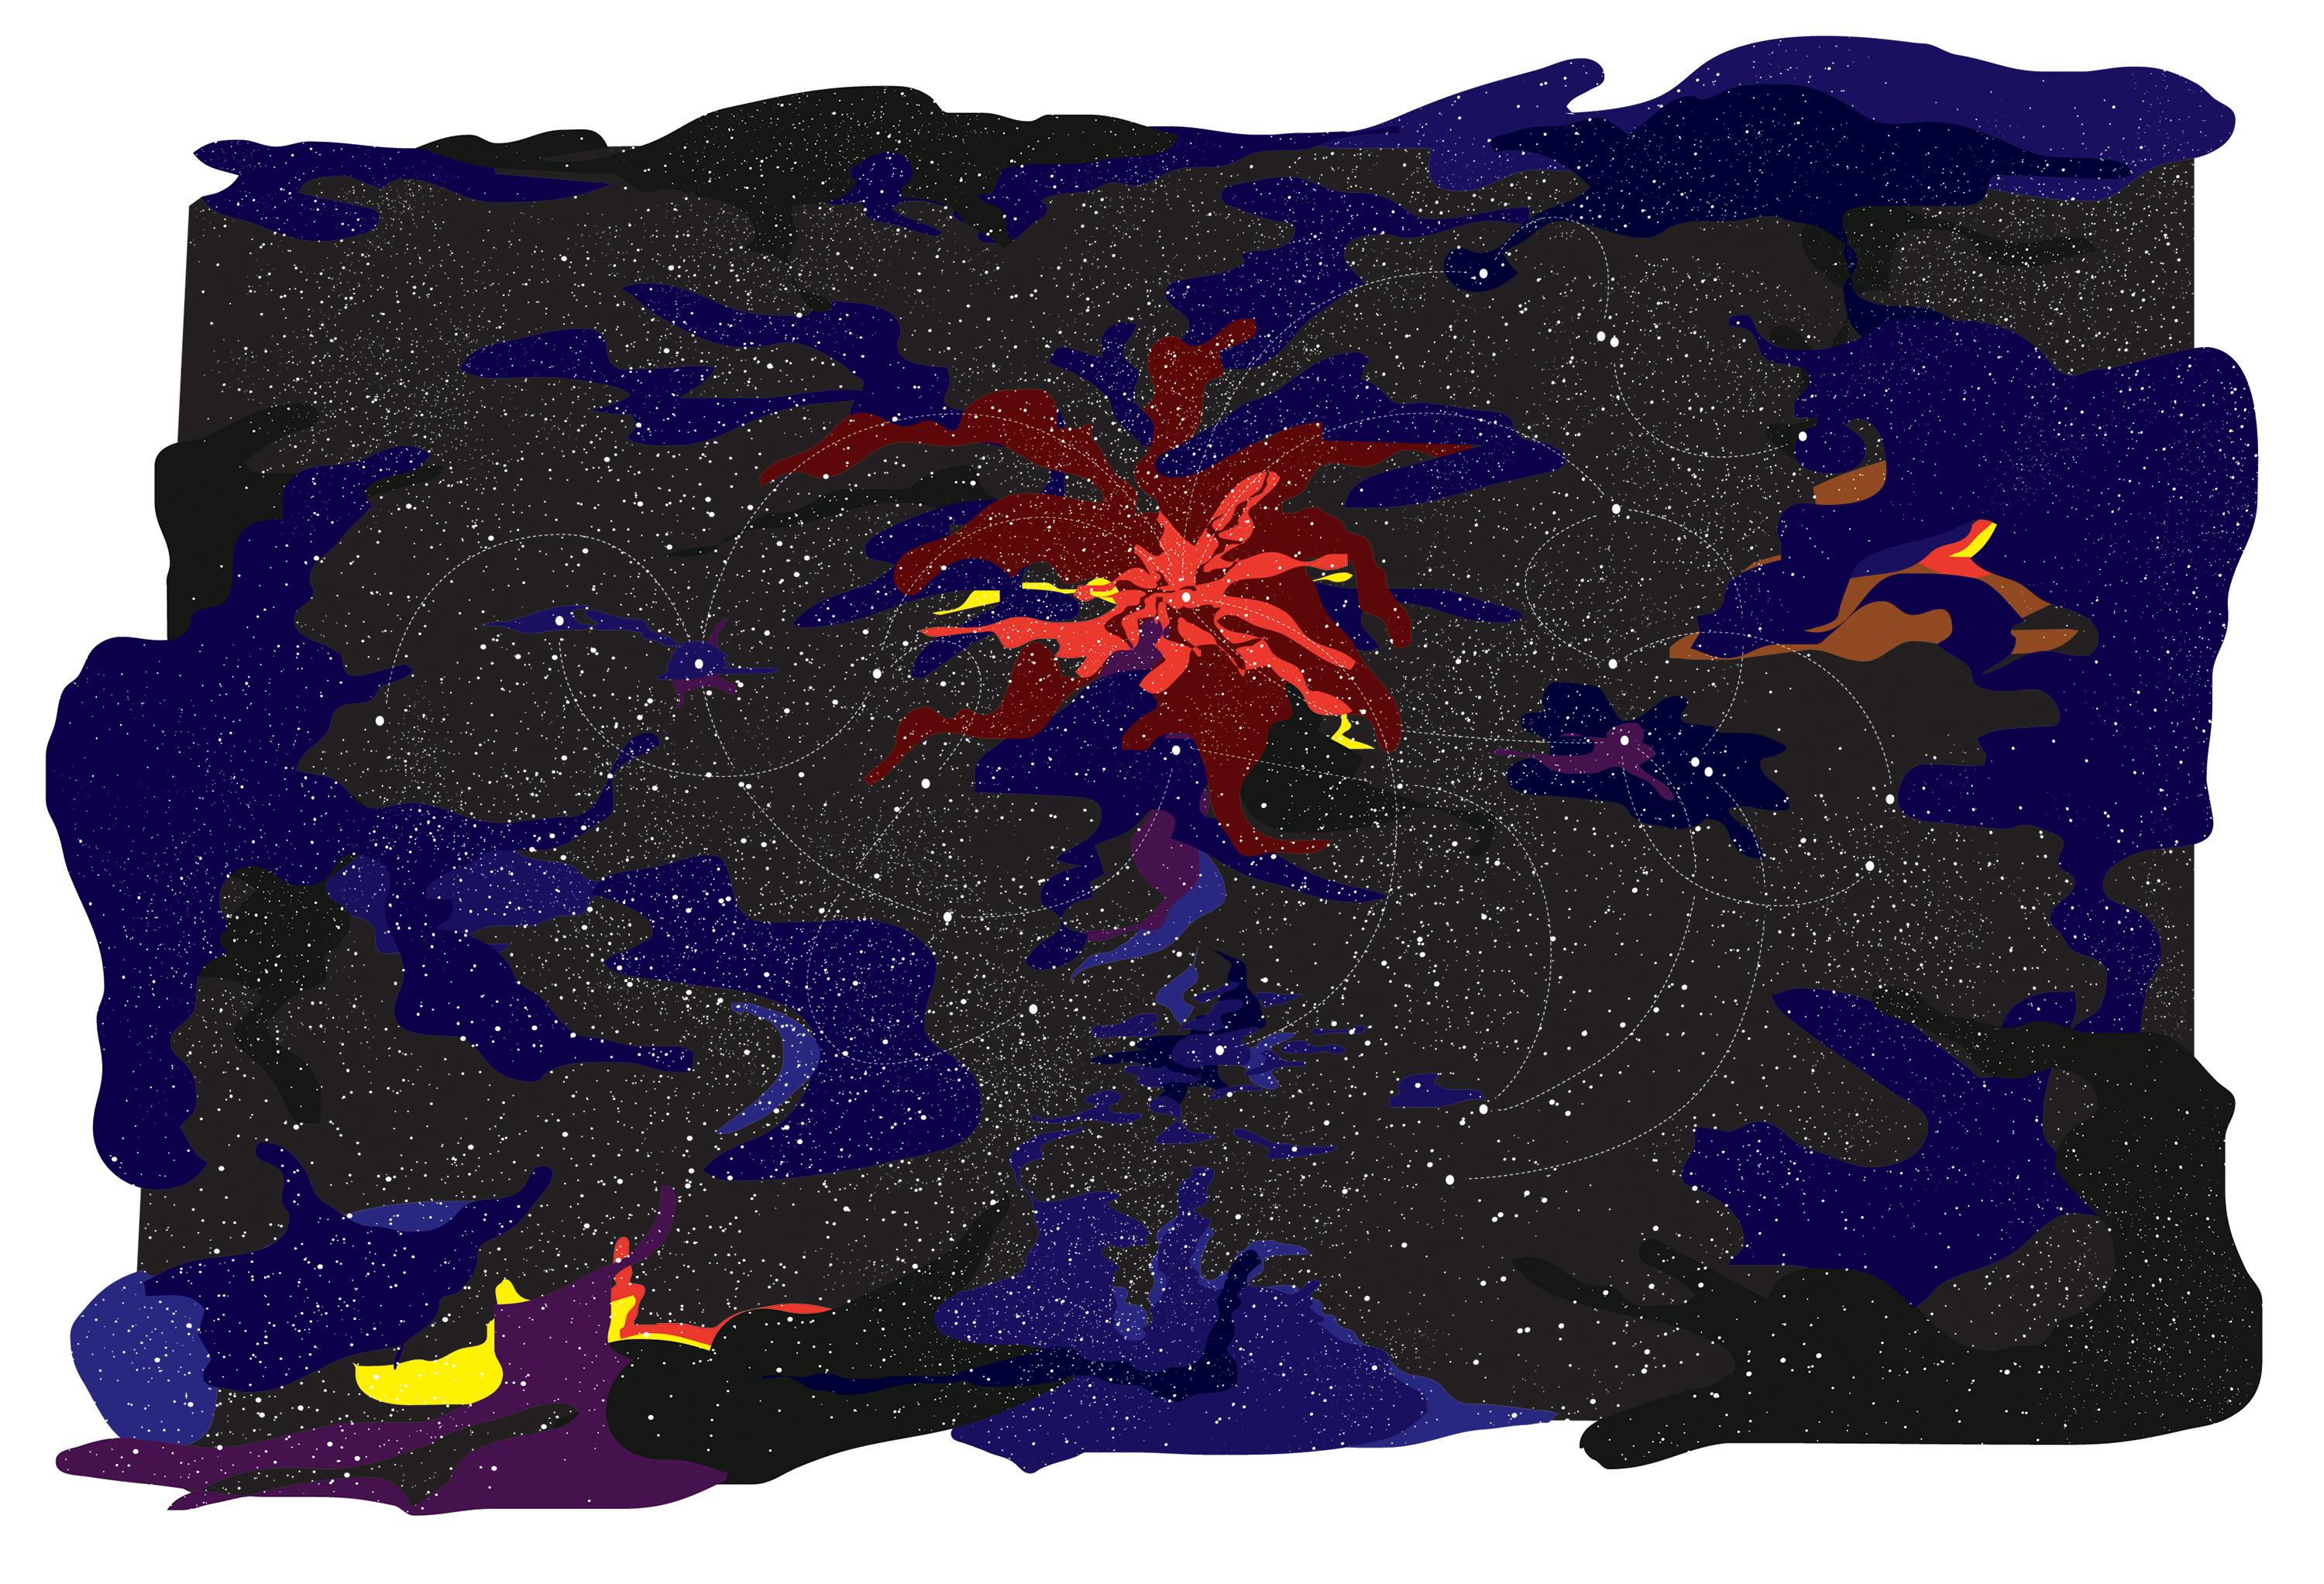 Dark gray, cloud-like shapes spread diffusely across a field of deep blue. Near the center, a starburst shape of deep red and orange emerges. Tiny white dots cover the entire image, occasionally connected to one another by faint dotted white lines.